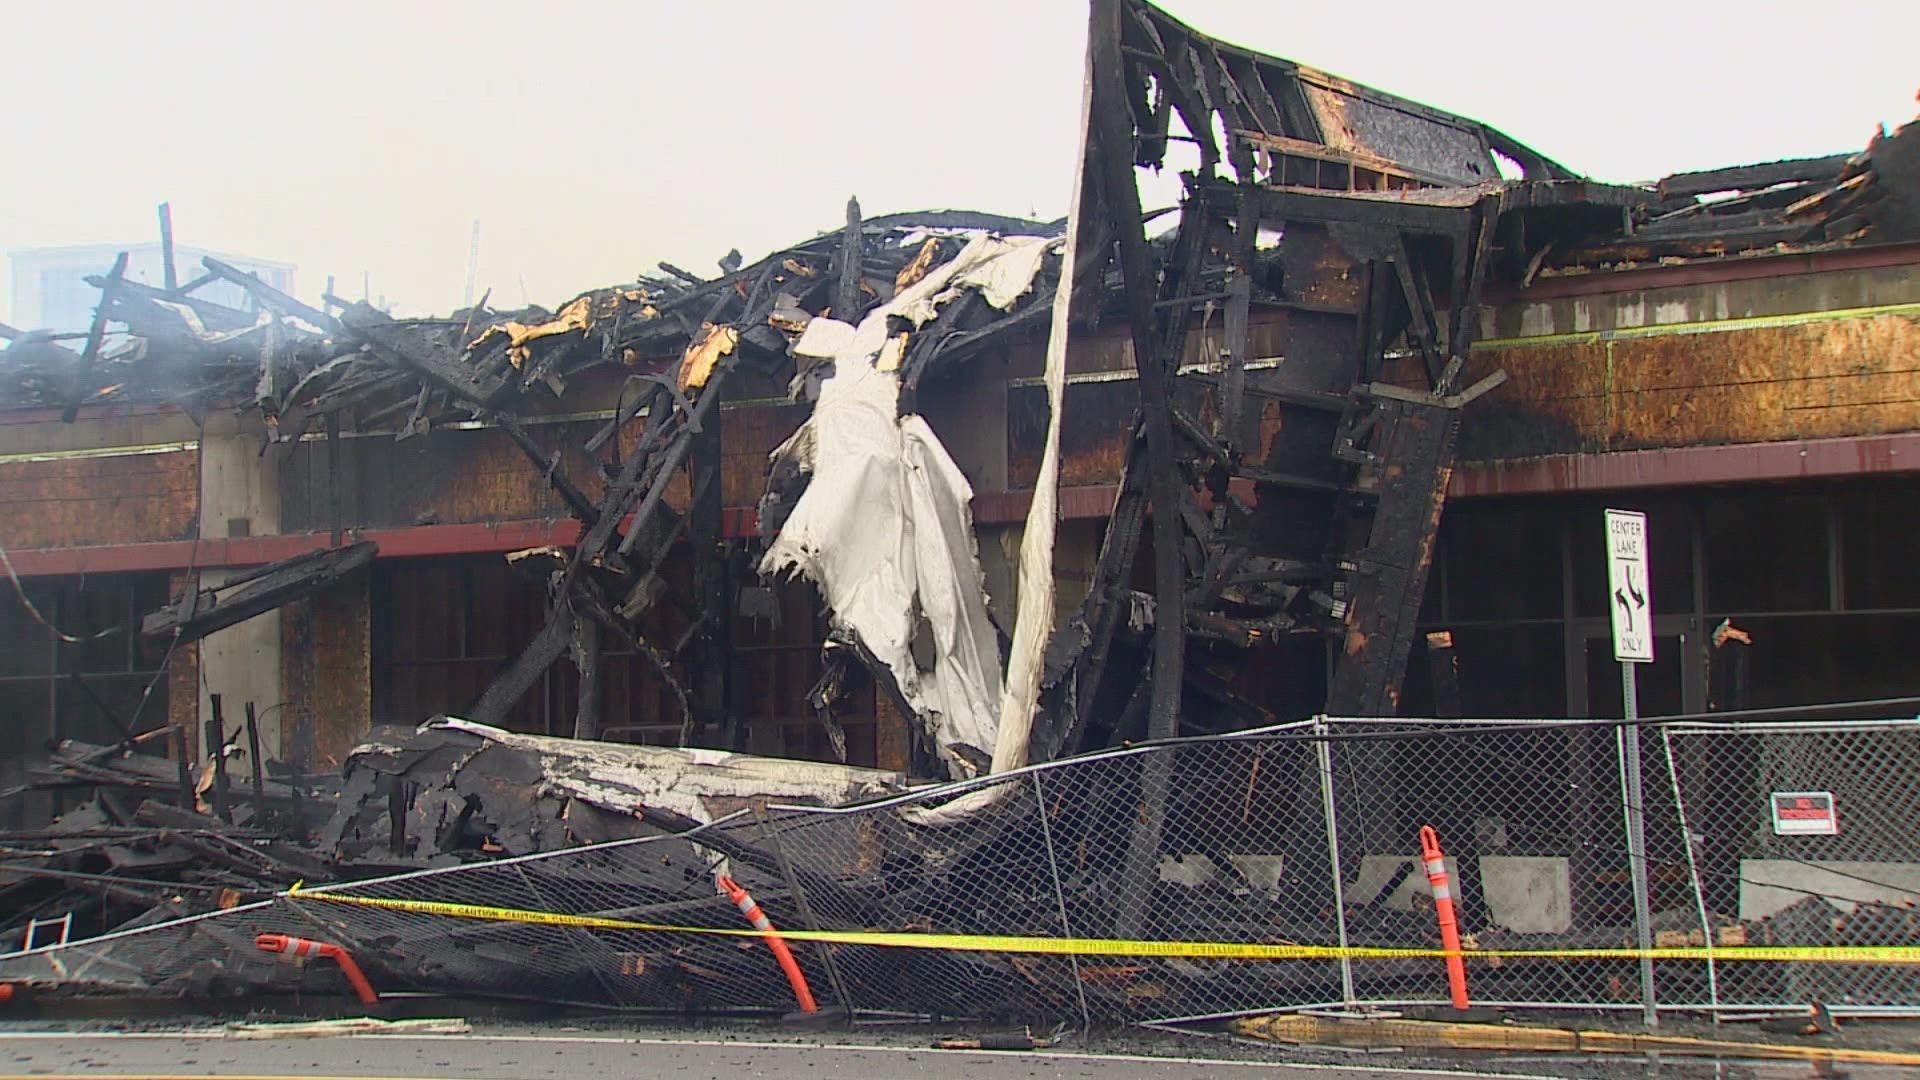 A dozen small businesses were also impacted by the blaze, according to a statement from Olympia City Manager Jay Burney.